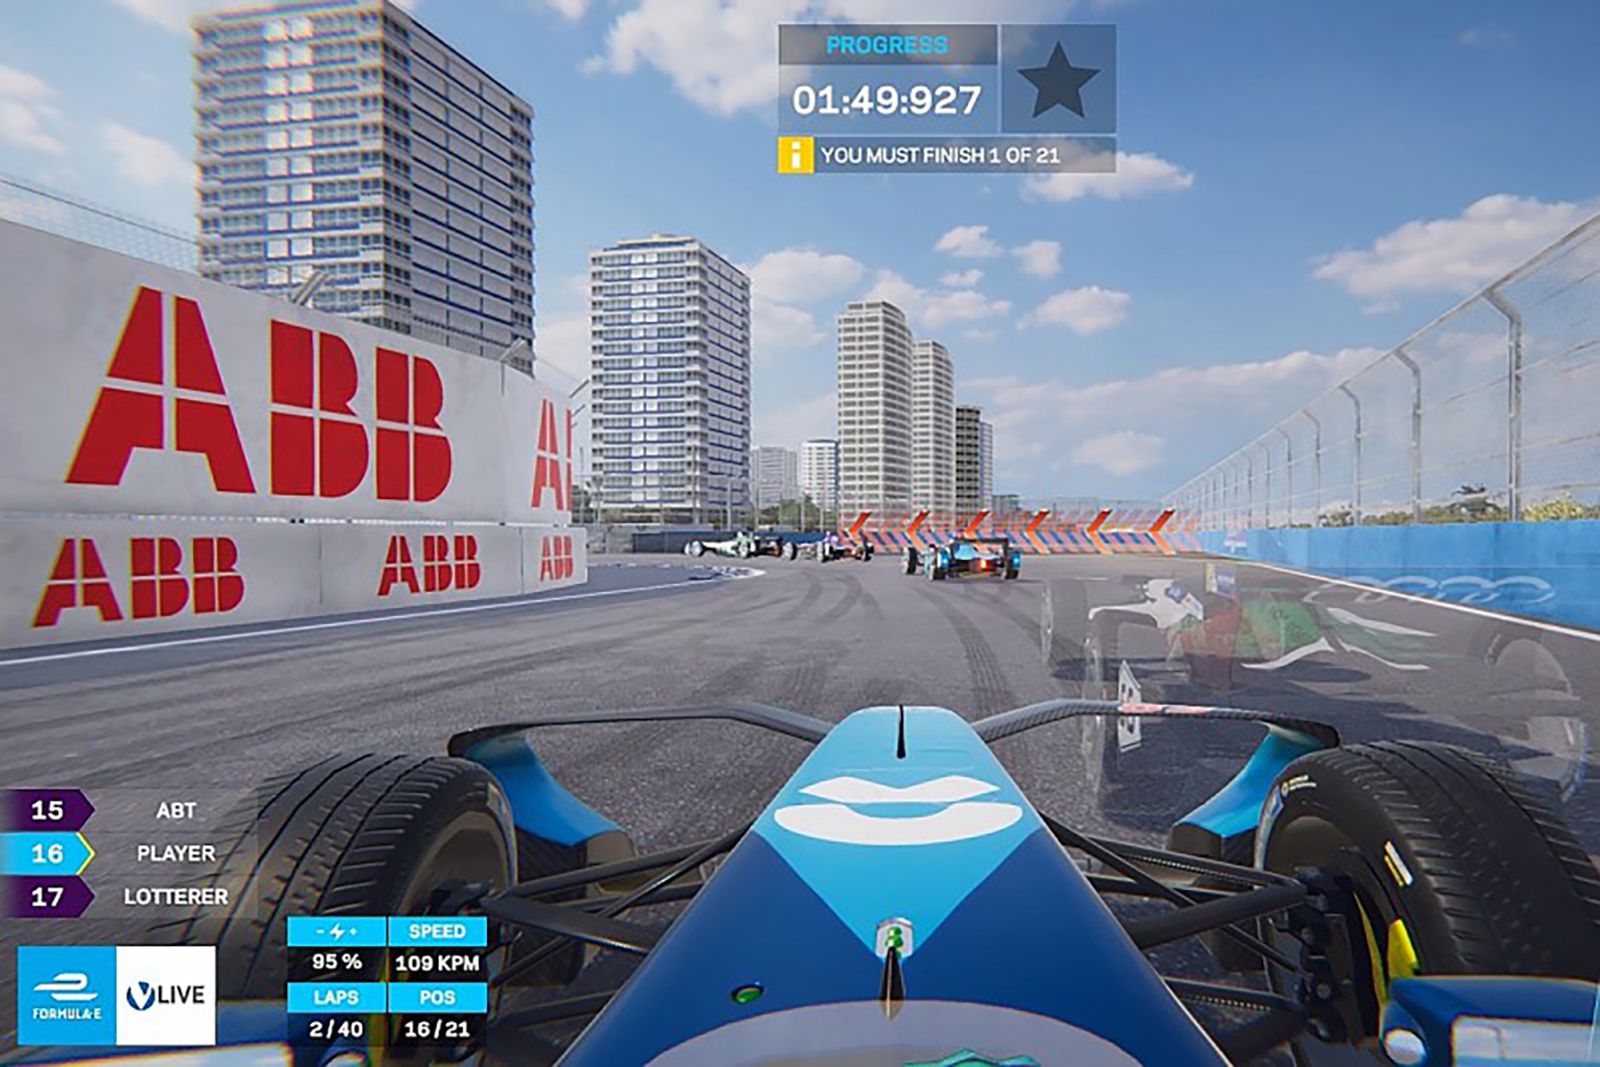 FE previews ghost racing app that lets you race against drivers in real-time image 1